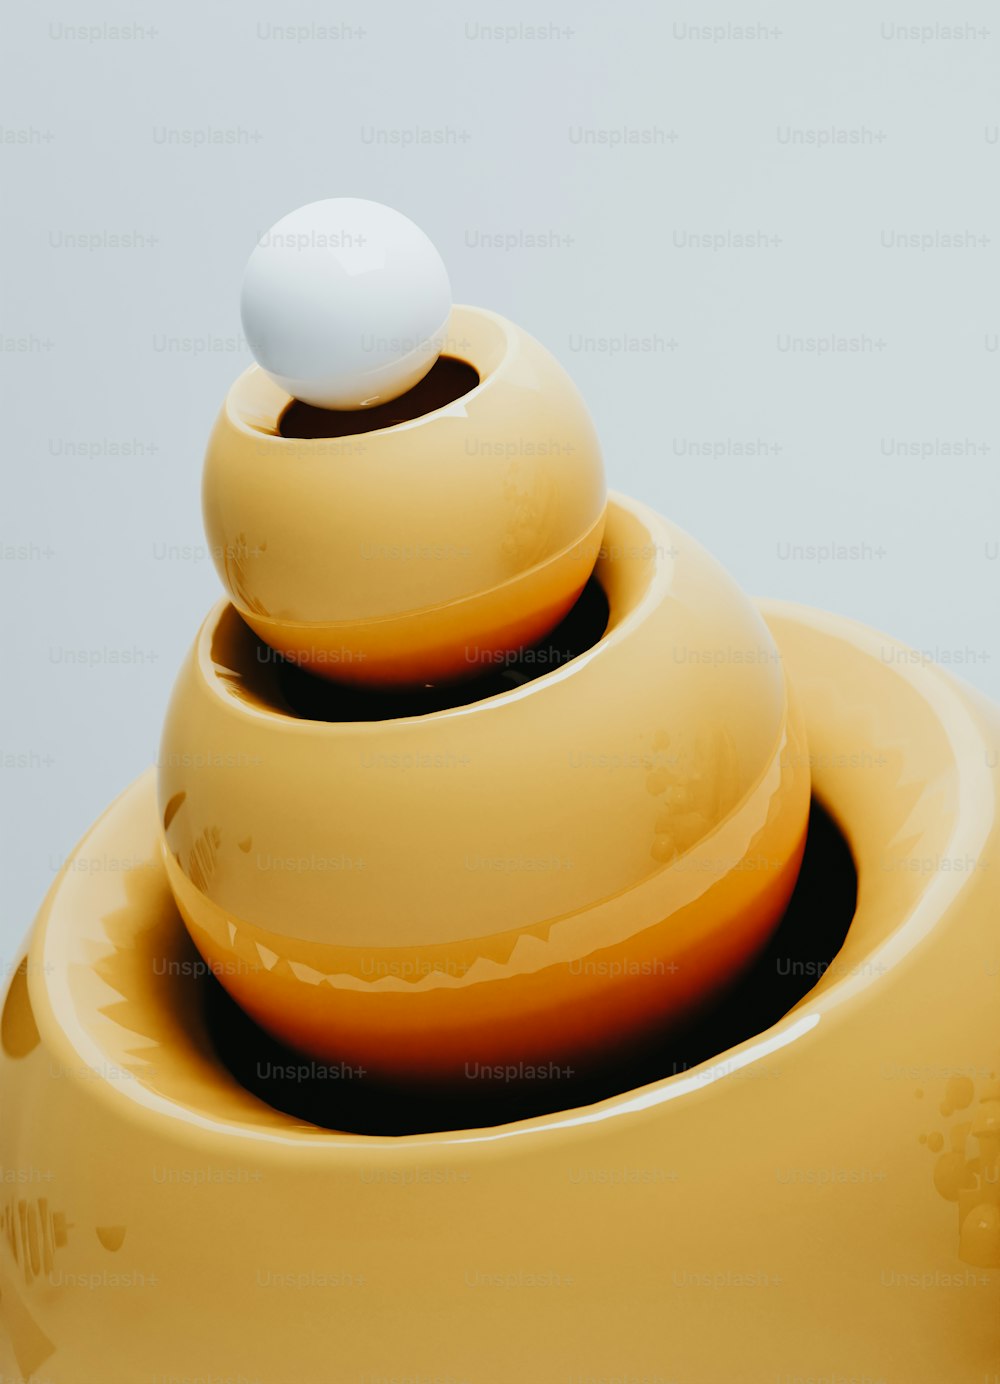 a yellow vase with a white ball on top of it